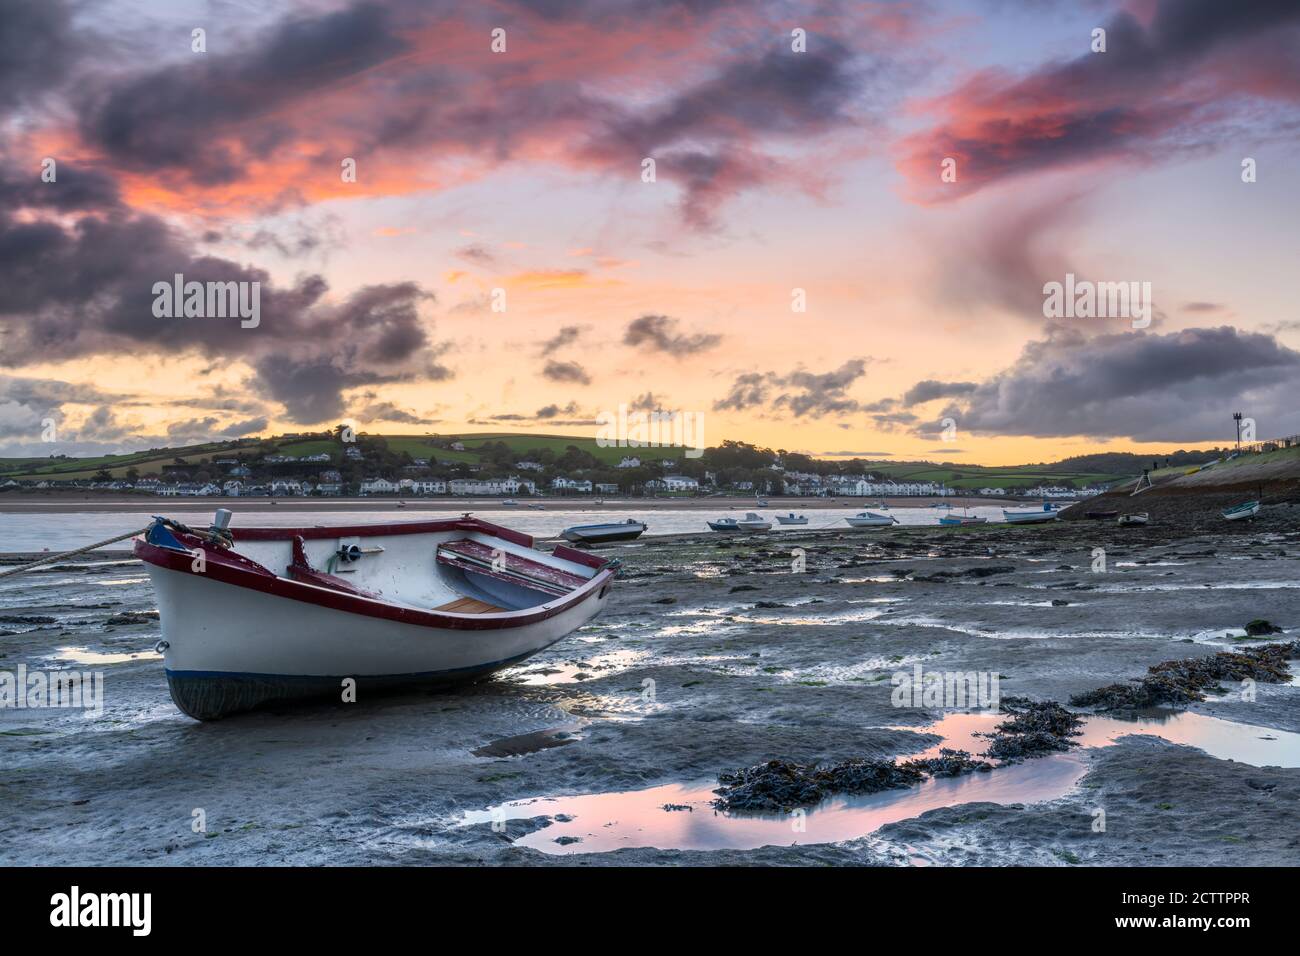 Appledore, North Devon, England. Friday 25th September 2020. UK Weather. After a night of heavy downpours and strong winds, at dawn the remnants of yet another heavy shower passes over the Torridge estuary at the small North Devon coastal vilage of Appledore. Credit: Terry Mathews/Alamy Live News Stock Photo